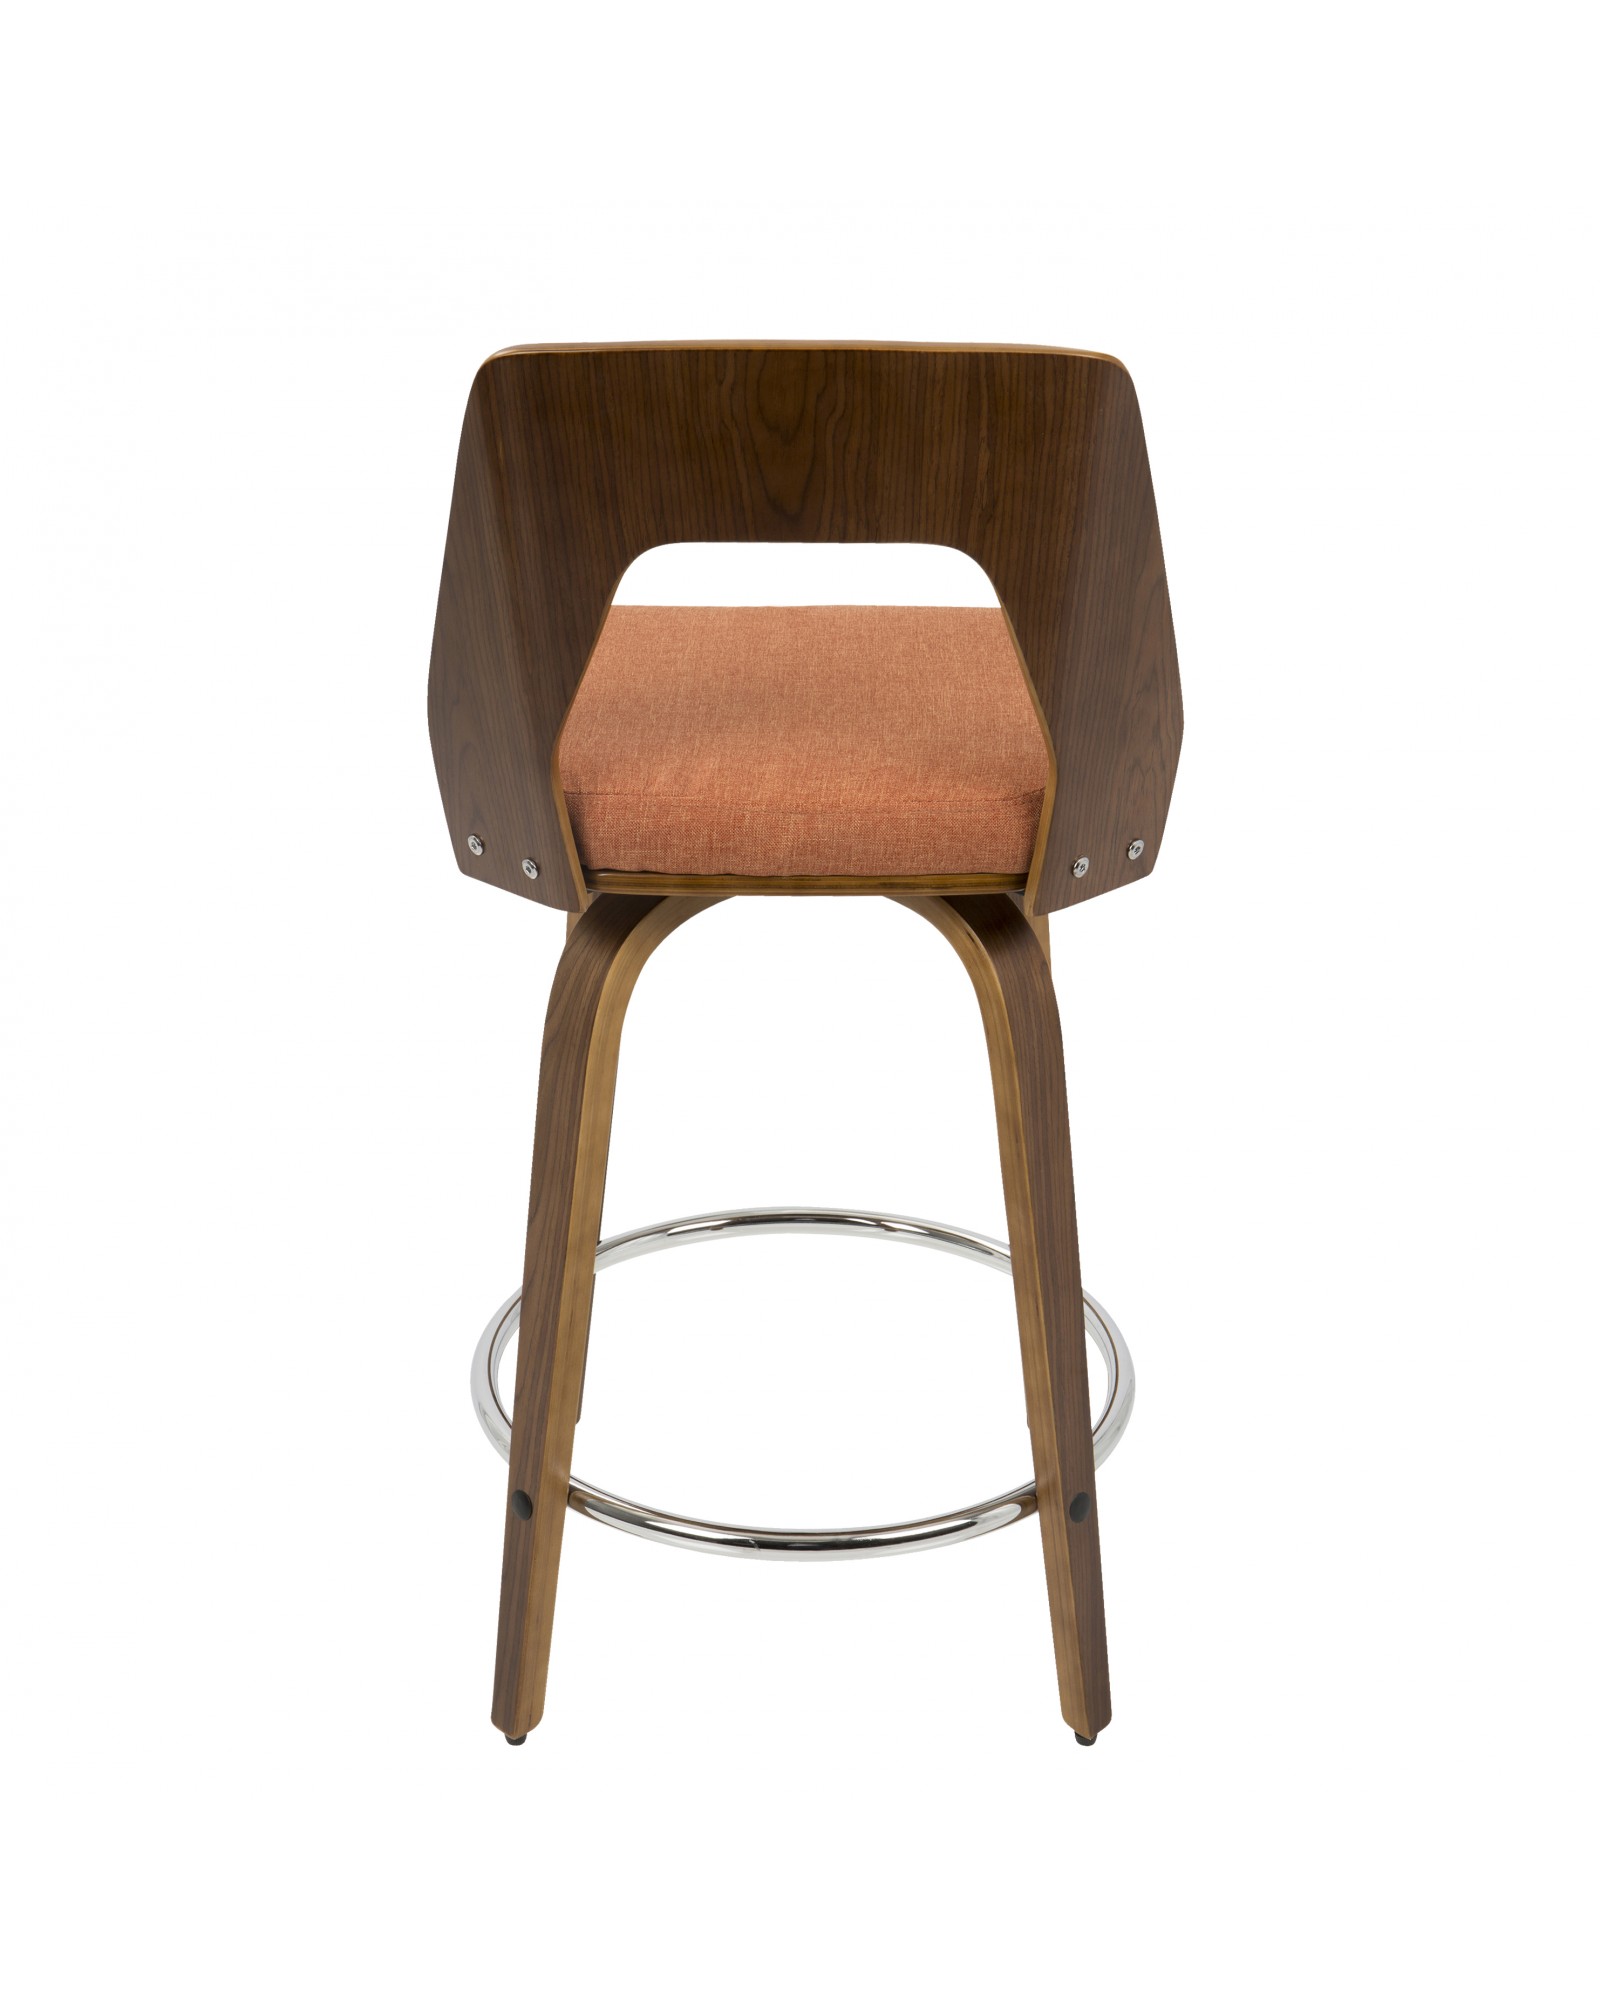 Trilogy Mid-Century Modern Counter Stool in Walnut and Orange Fabric